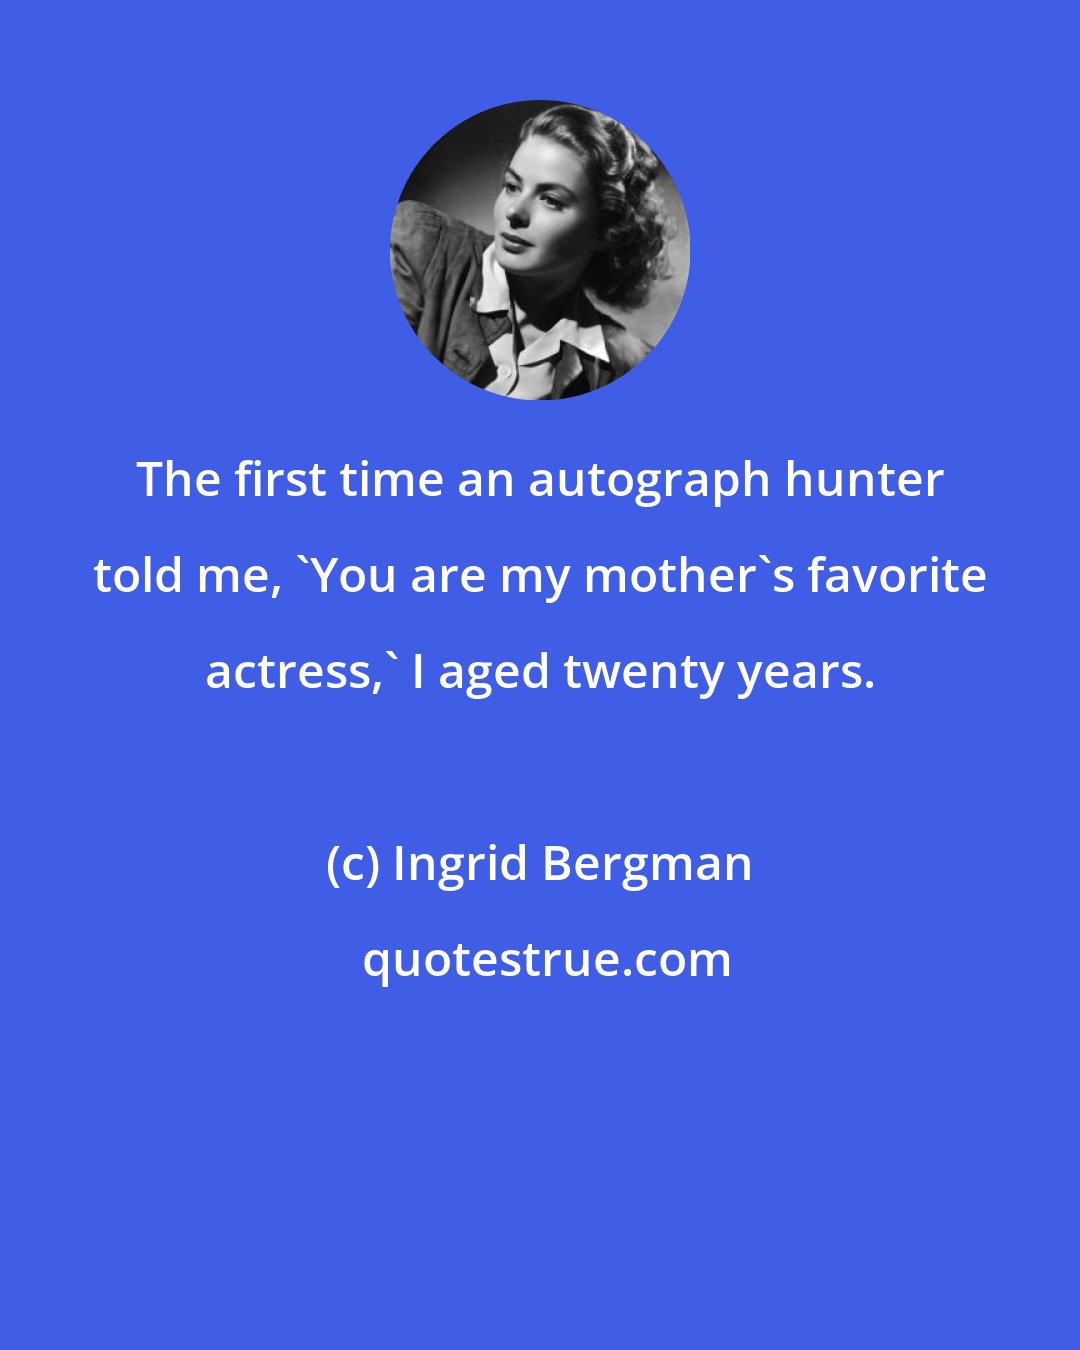 Ingrid Bergman: The first time an autograph hunter told me, 'You are my mother's favorite actress,' I aged twenty years.